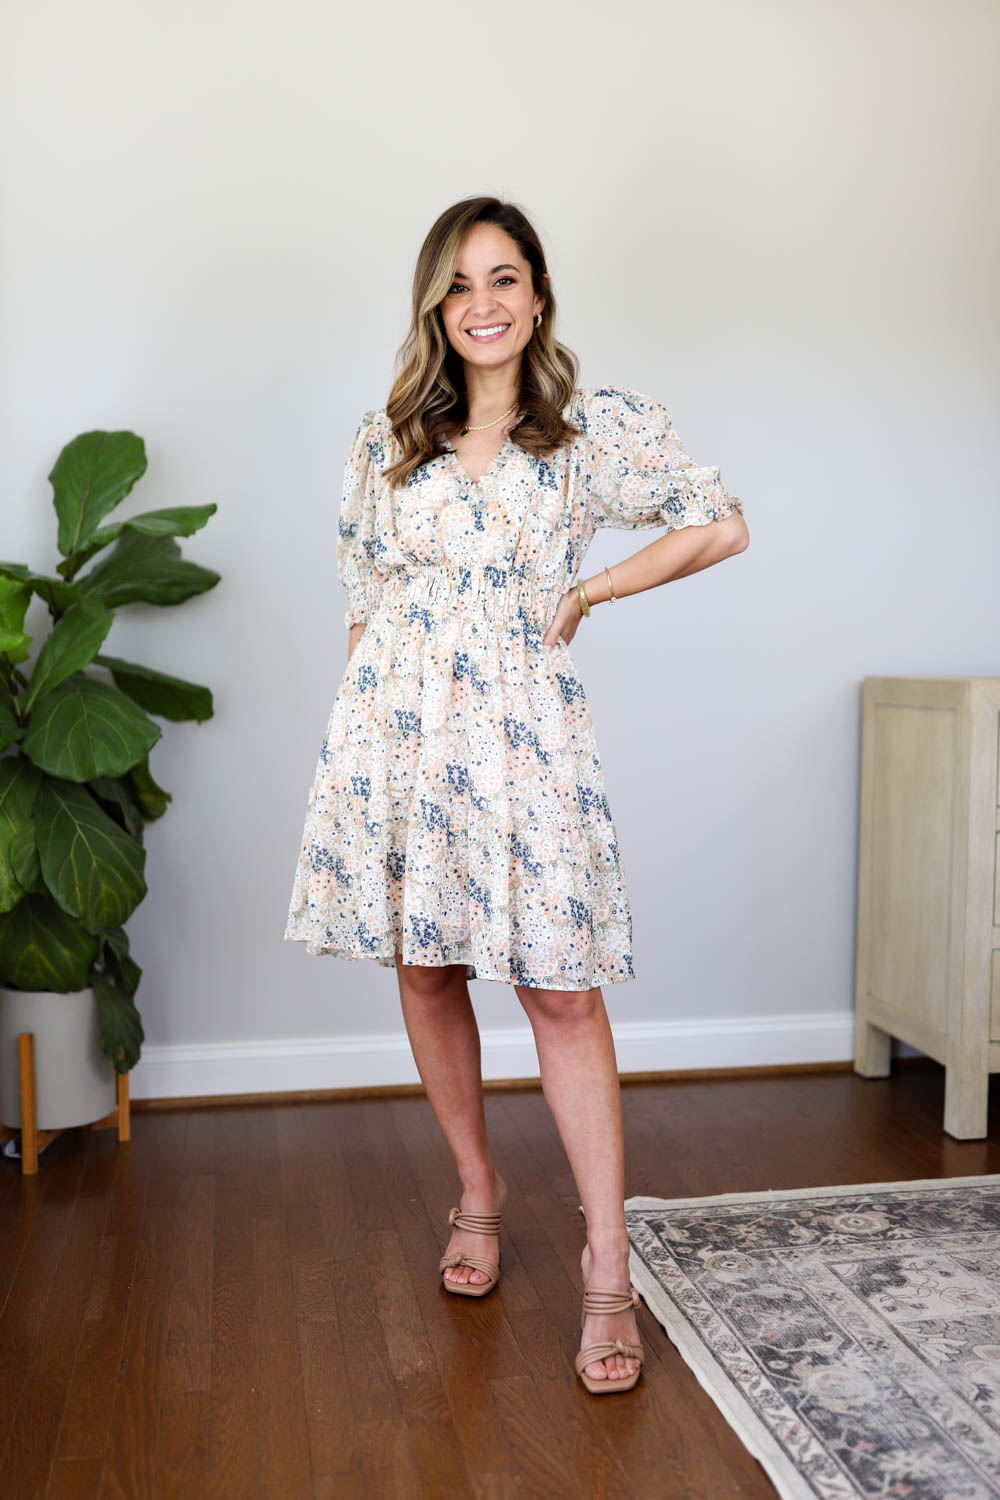 Gibsonlook try-on via pumps and push-up blog | petite friendly spring and summer outfits | petite friendly dresses | gibsonlook